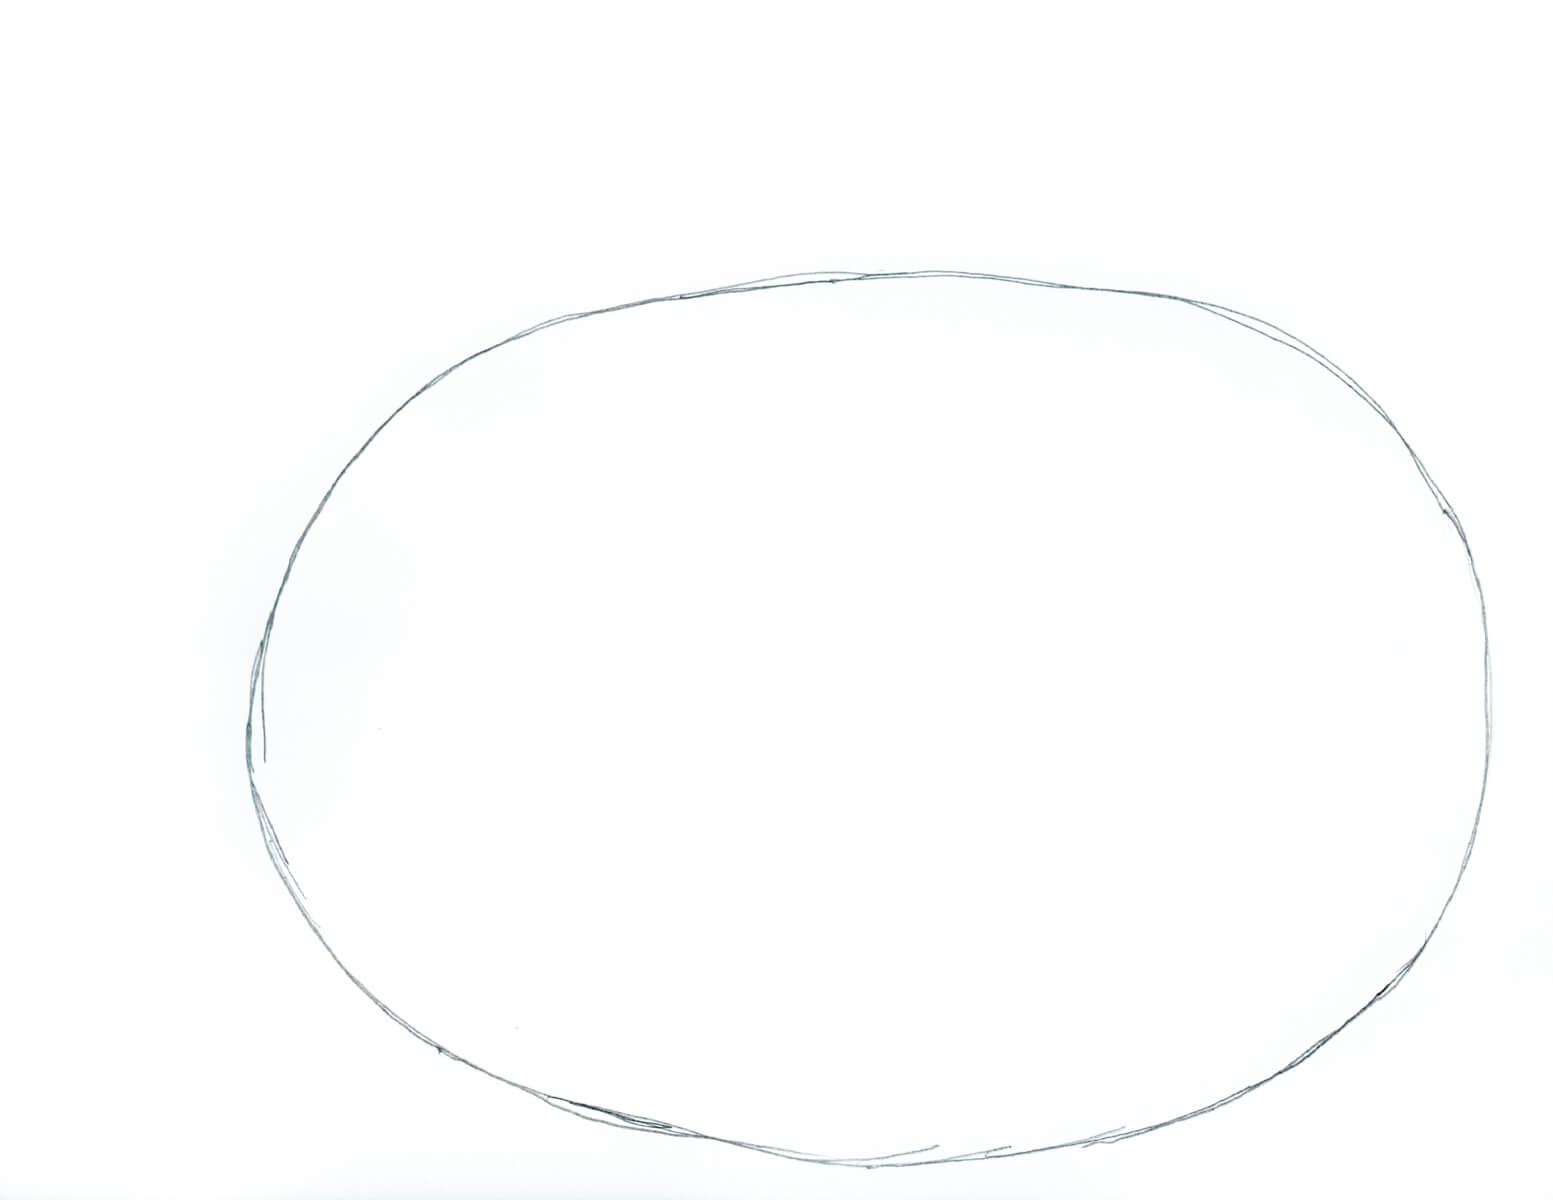 An oval on a piece of paper to start drawing a pumpkin.